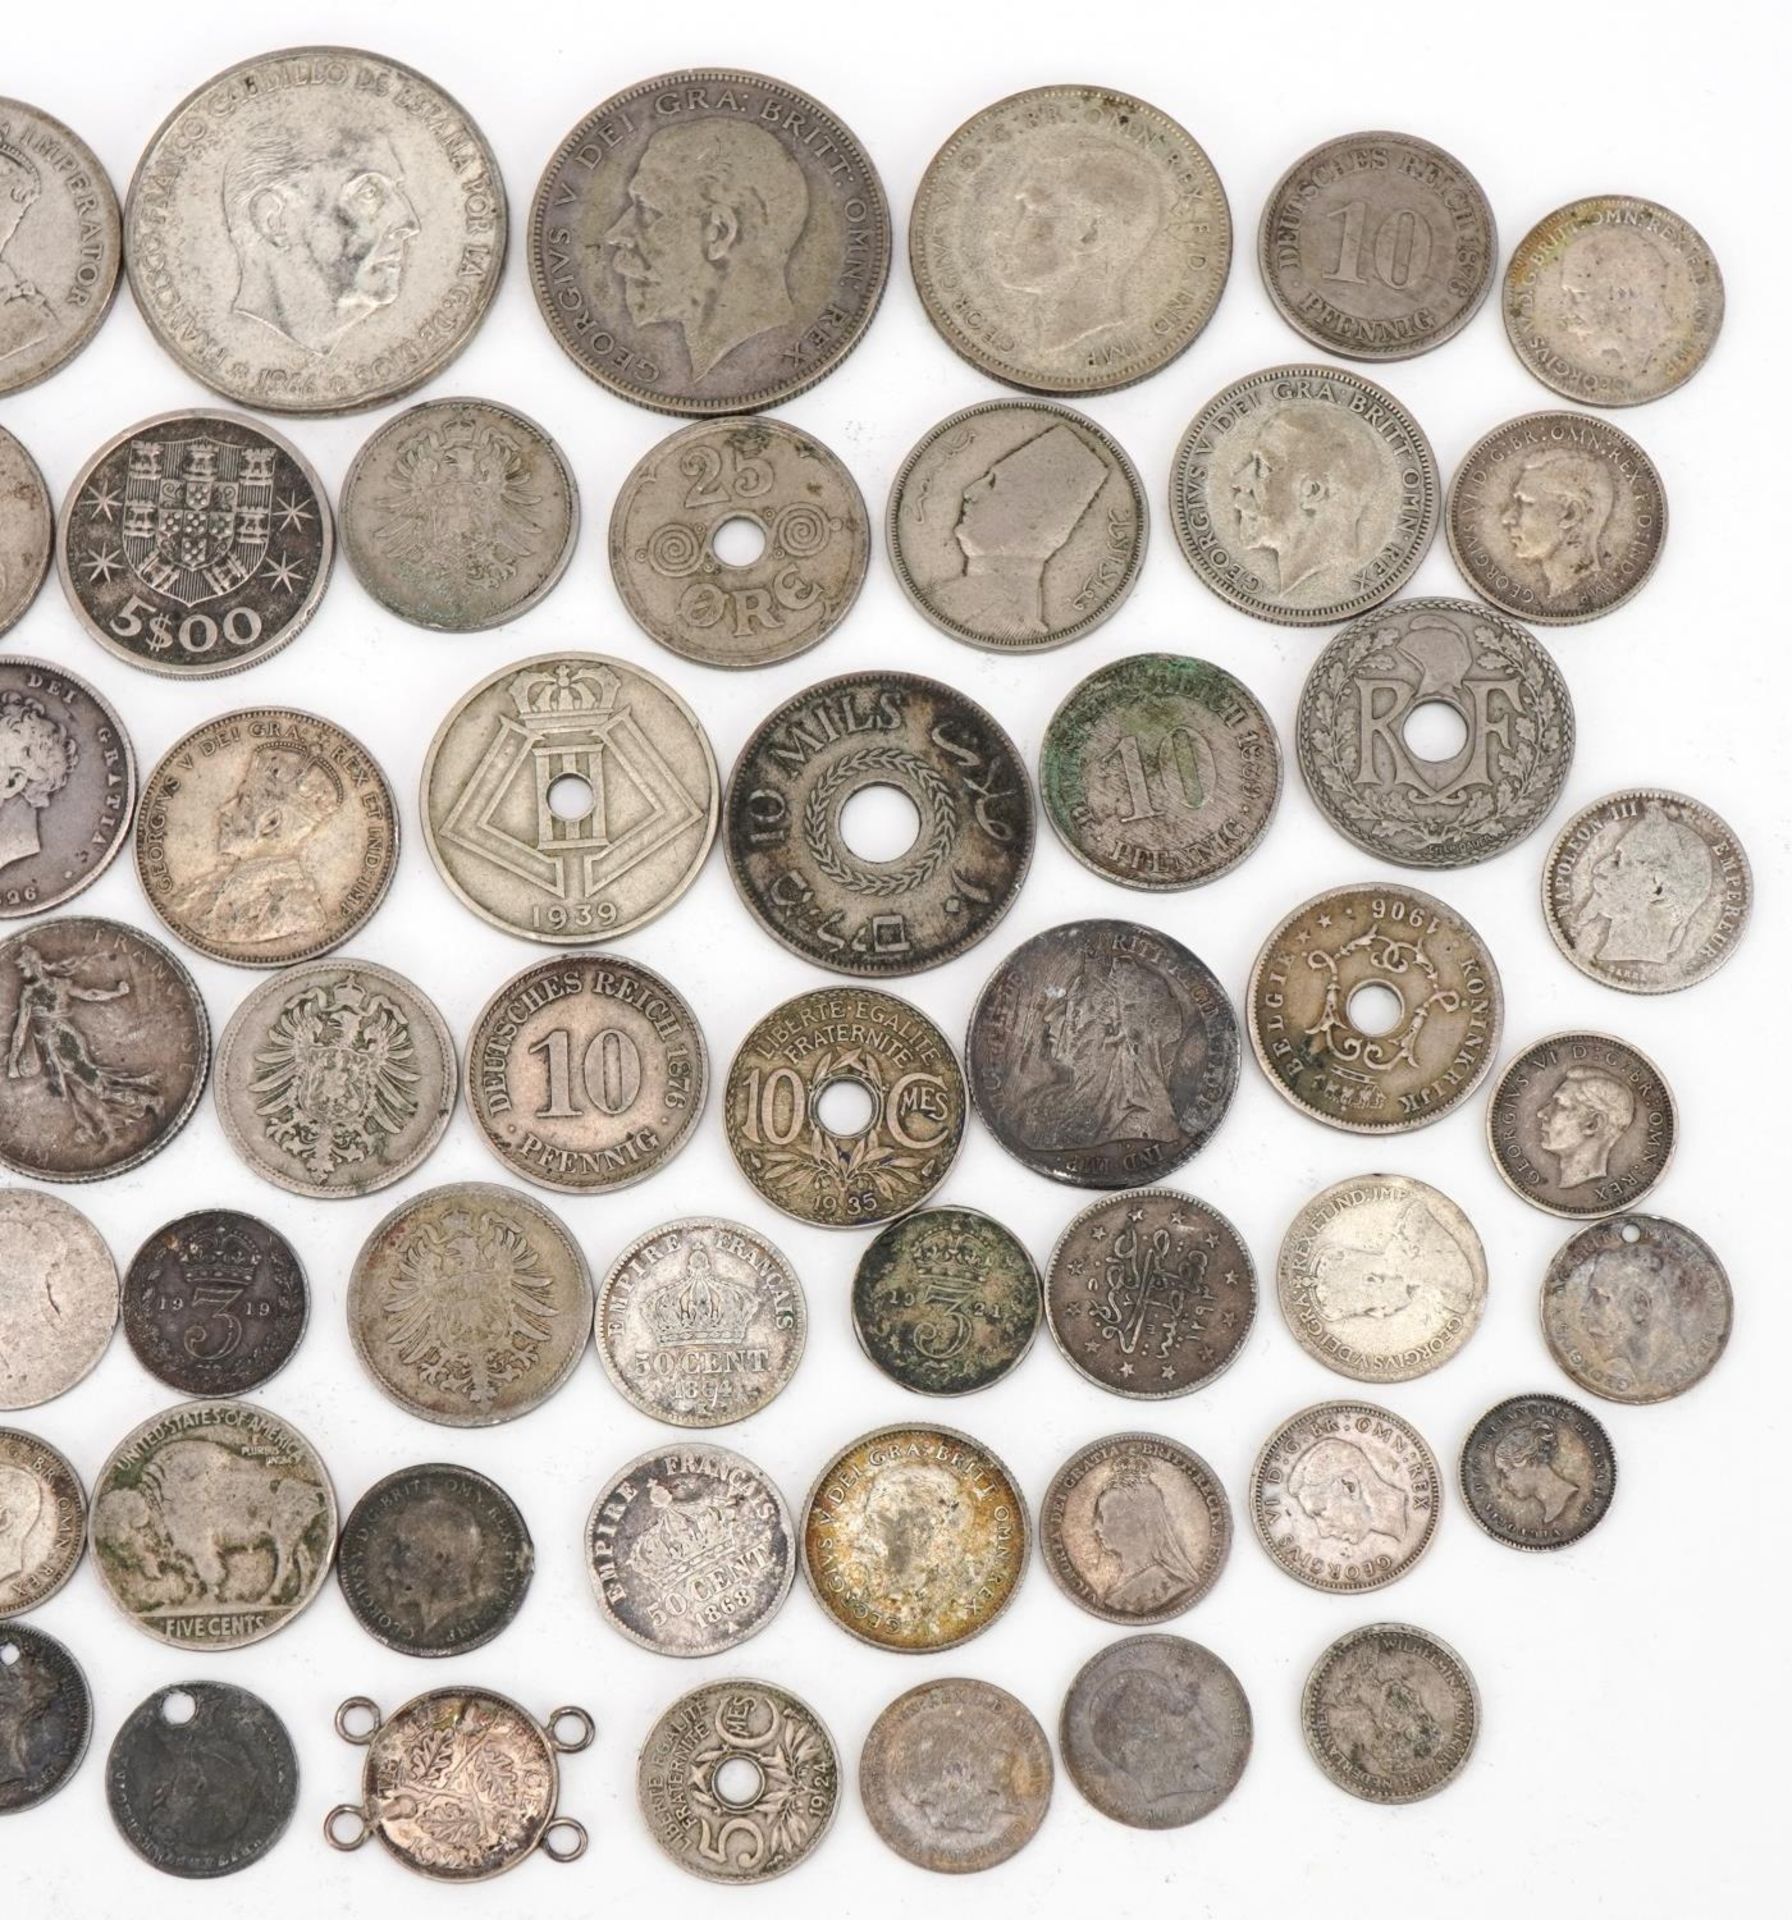 British and world coinage including one hundred ptas, half crowns and 1870 maundy twopence, 250g : - Image 6 of 6